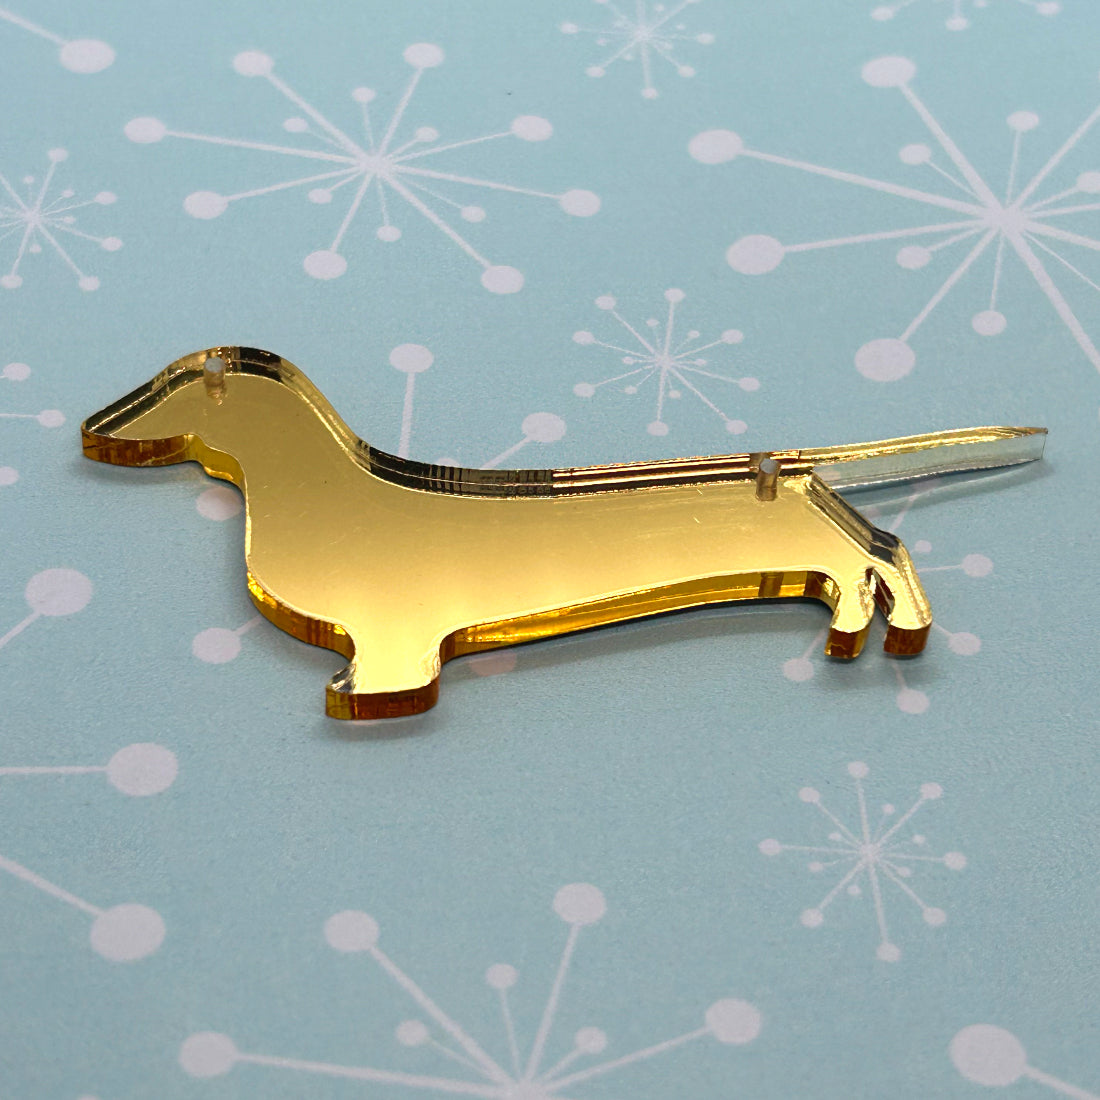 Acrylic sausage dog necklaces and brooches - The Argentum Design Co